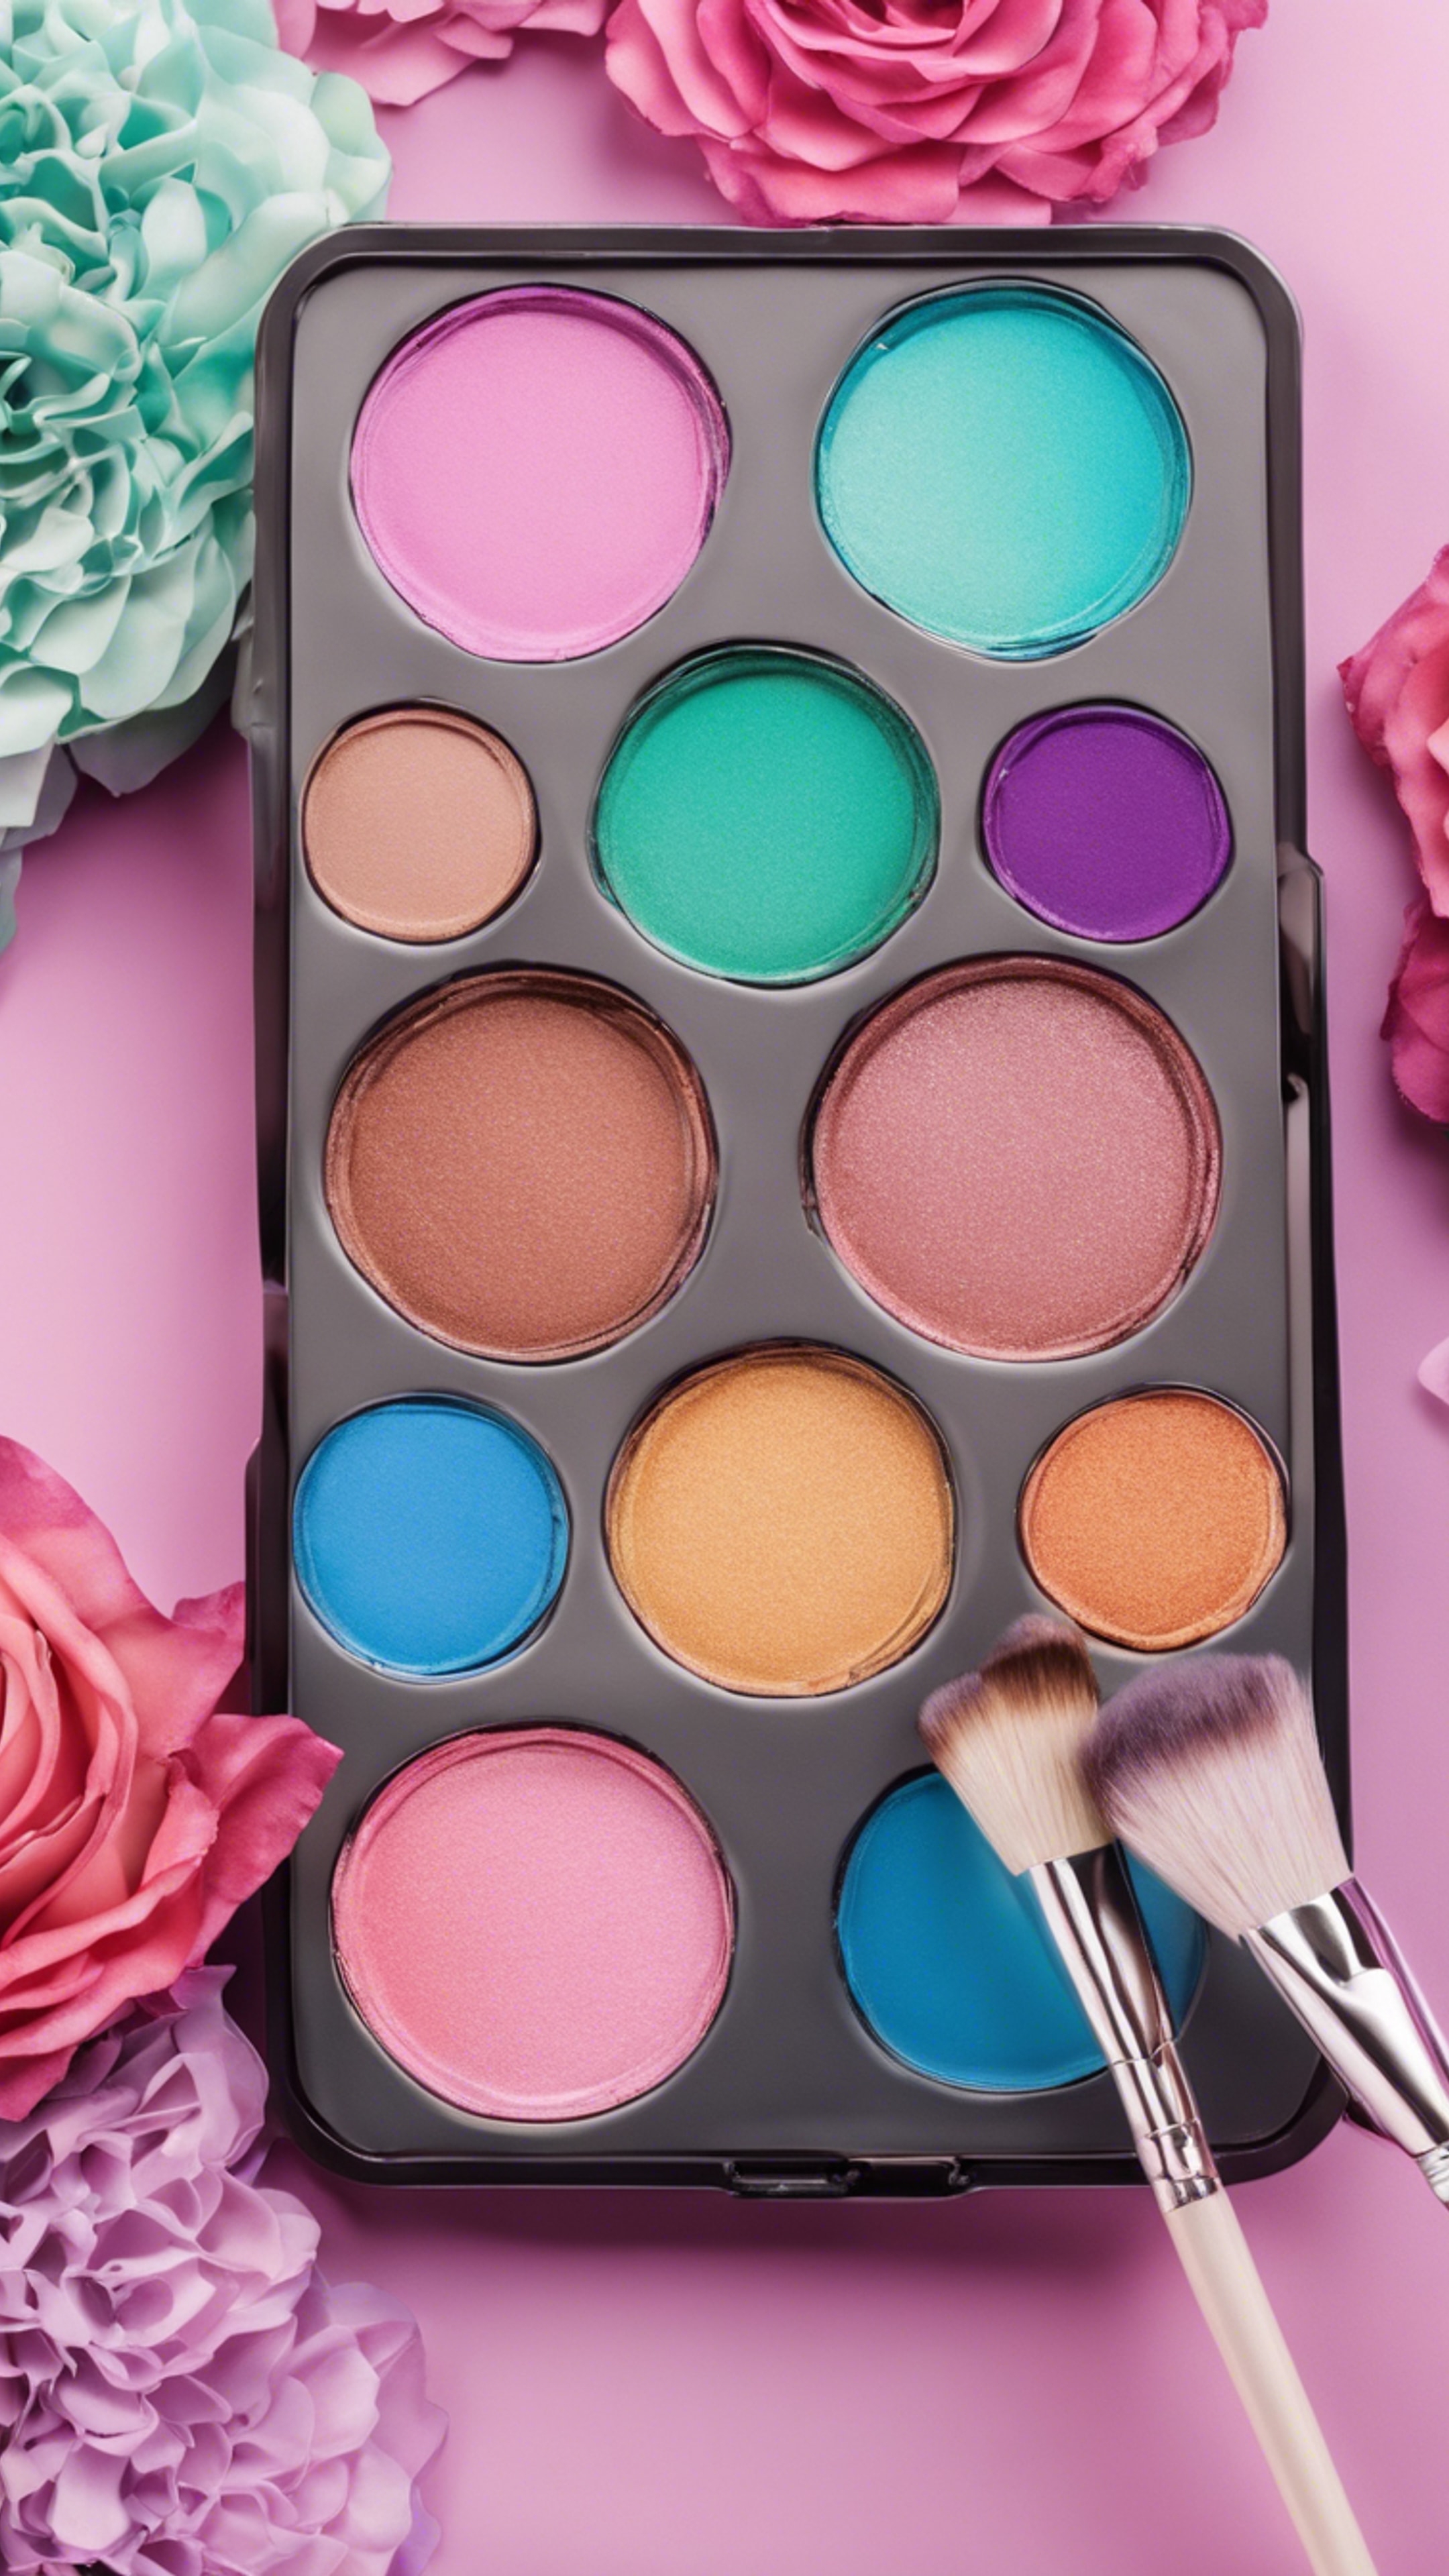 A cute girly makeup palette with a variety of vibrant colors and a brush for application.壁紙[6f3ccf3758d549978770]